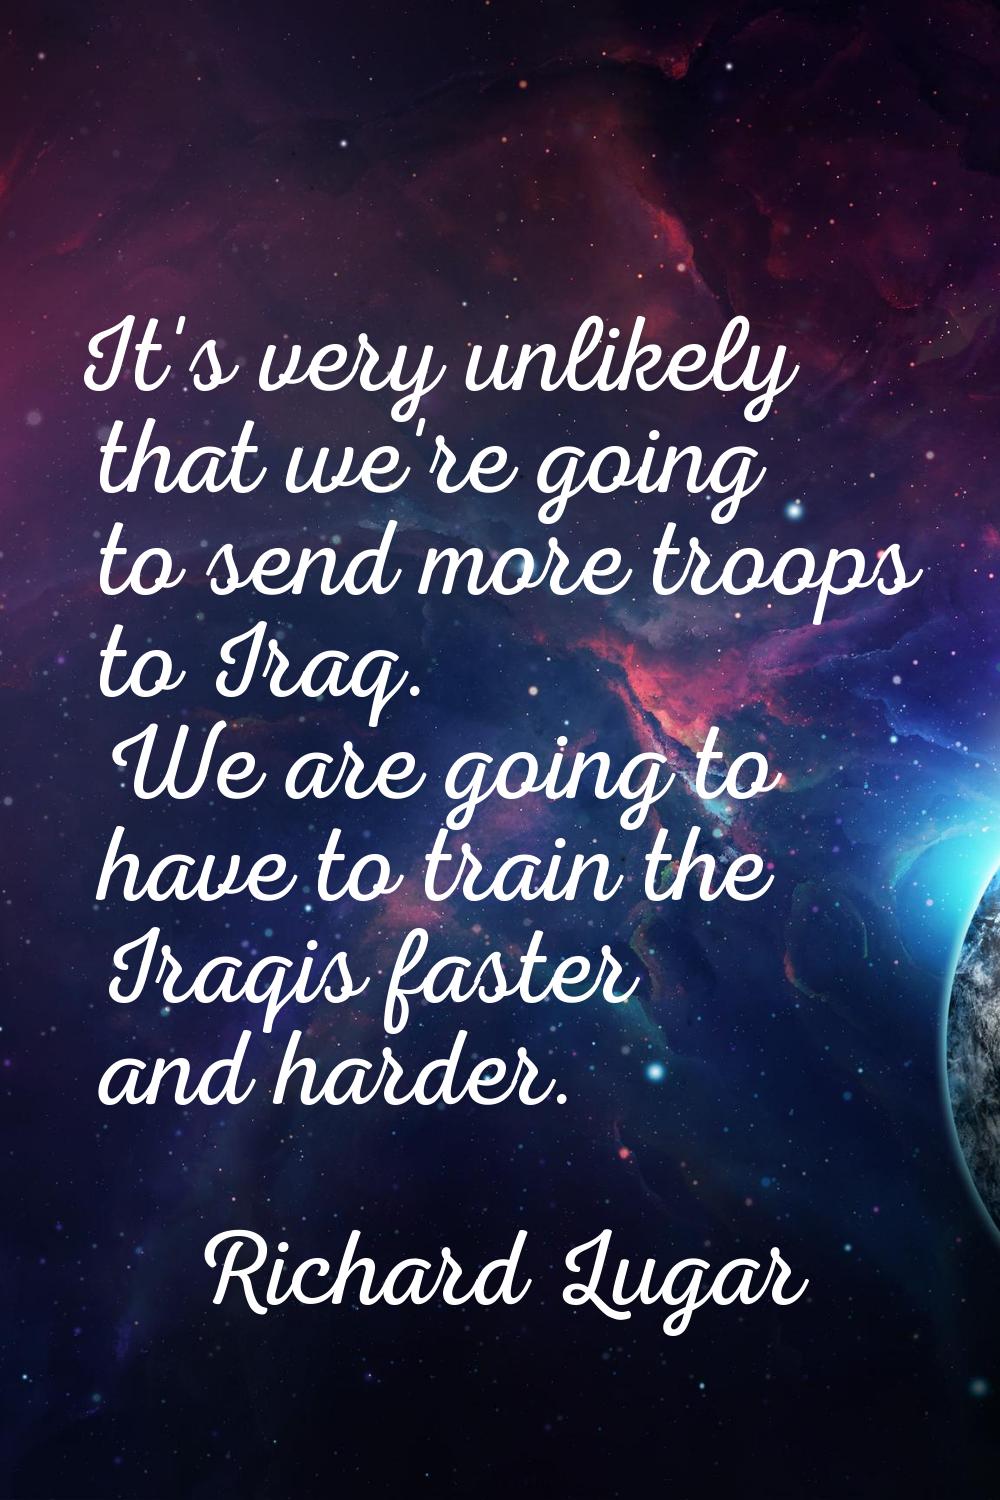 It's very unlikely that we're going to send more troops to Iraq. We are going to have to train the 